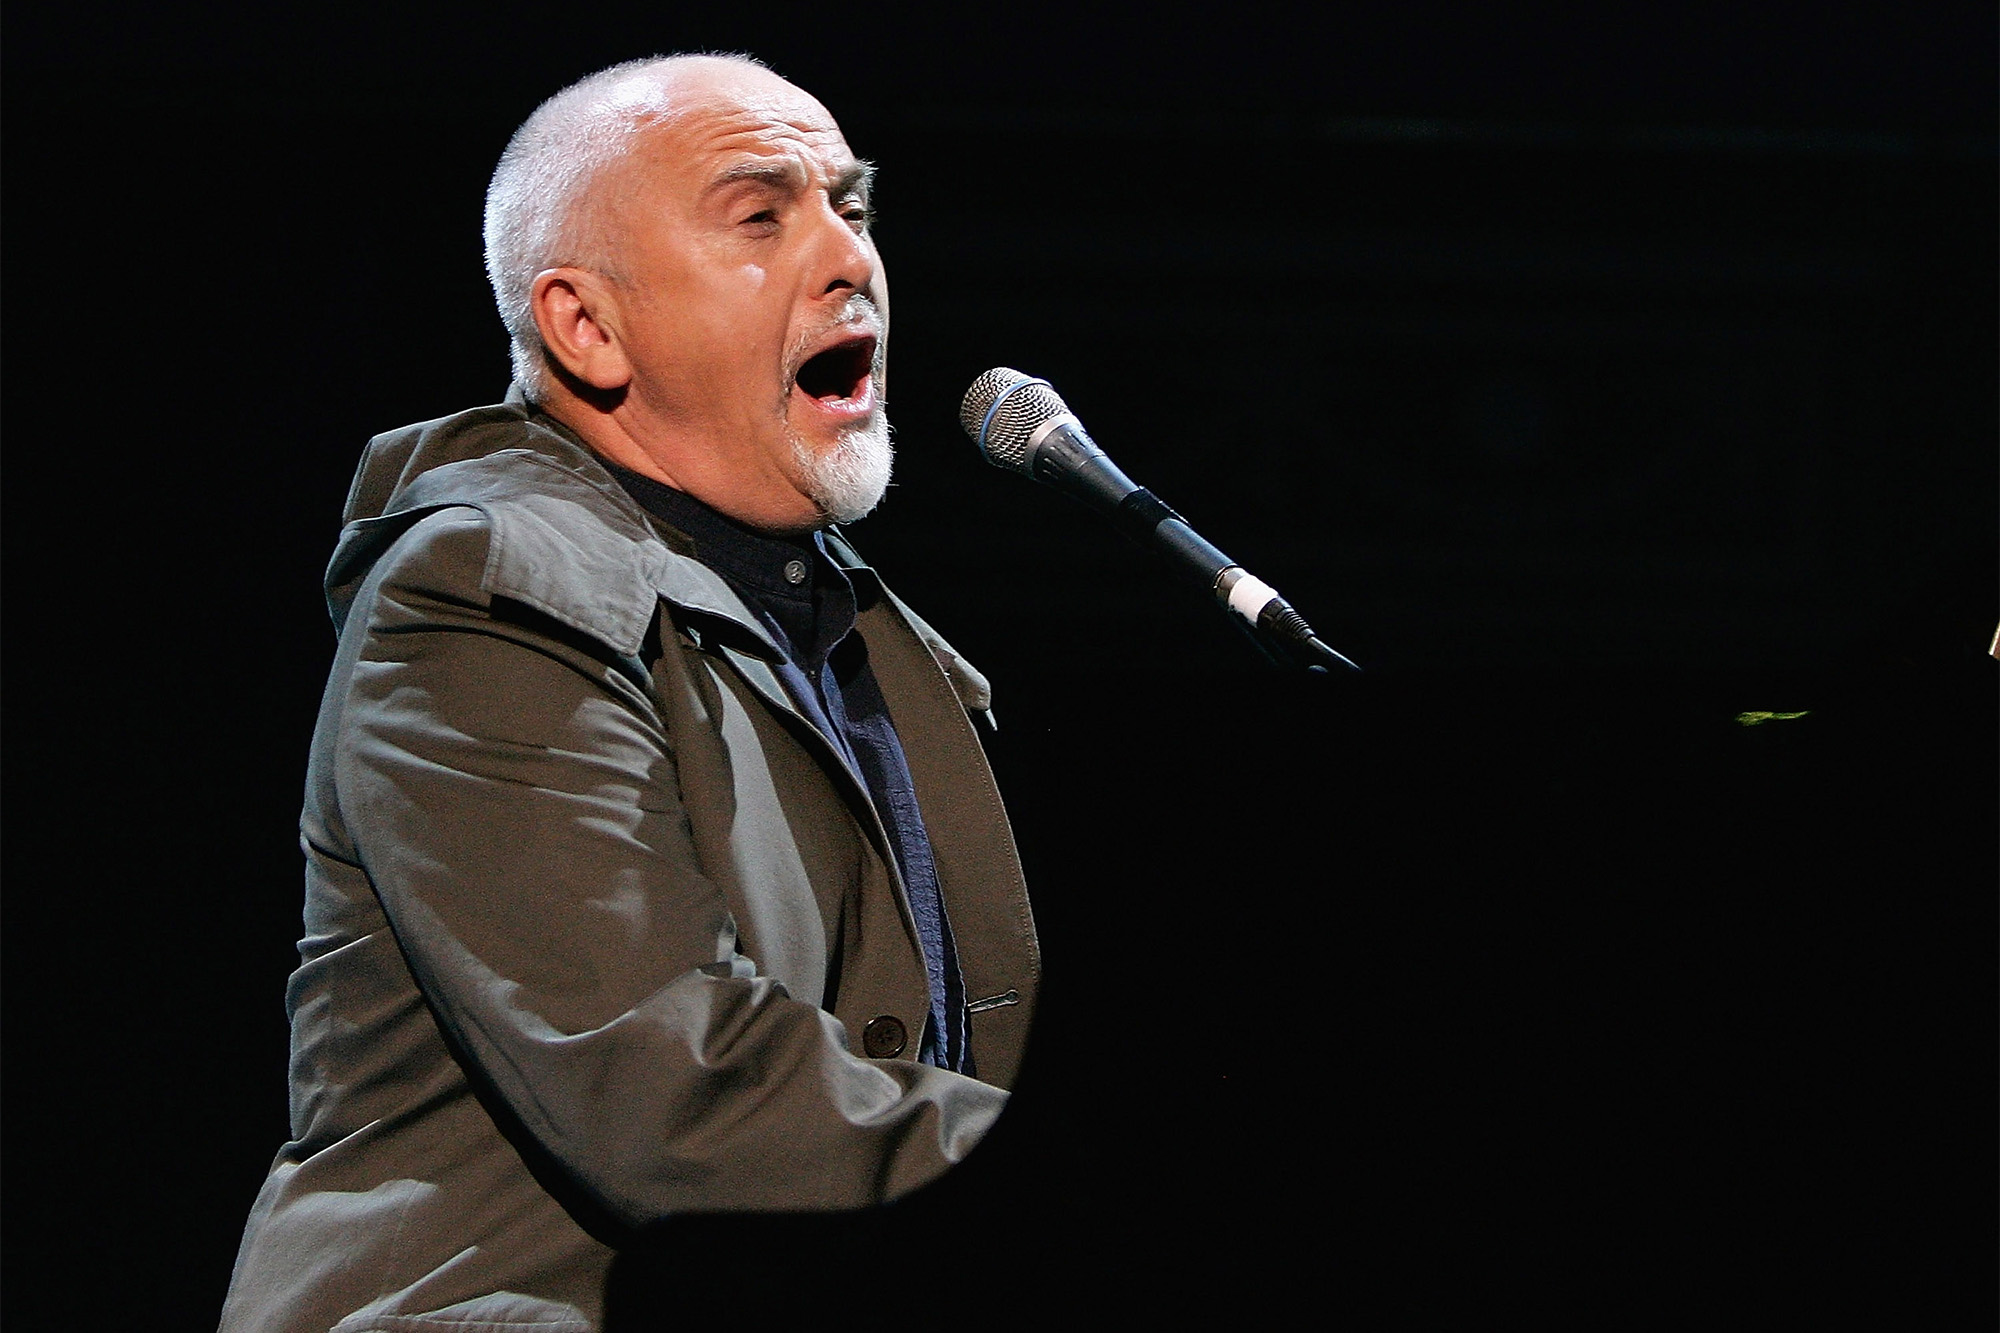 How to get tickets to Peter Gabriel’s 2023 tour Schedule, dates Noti